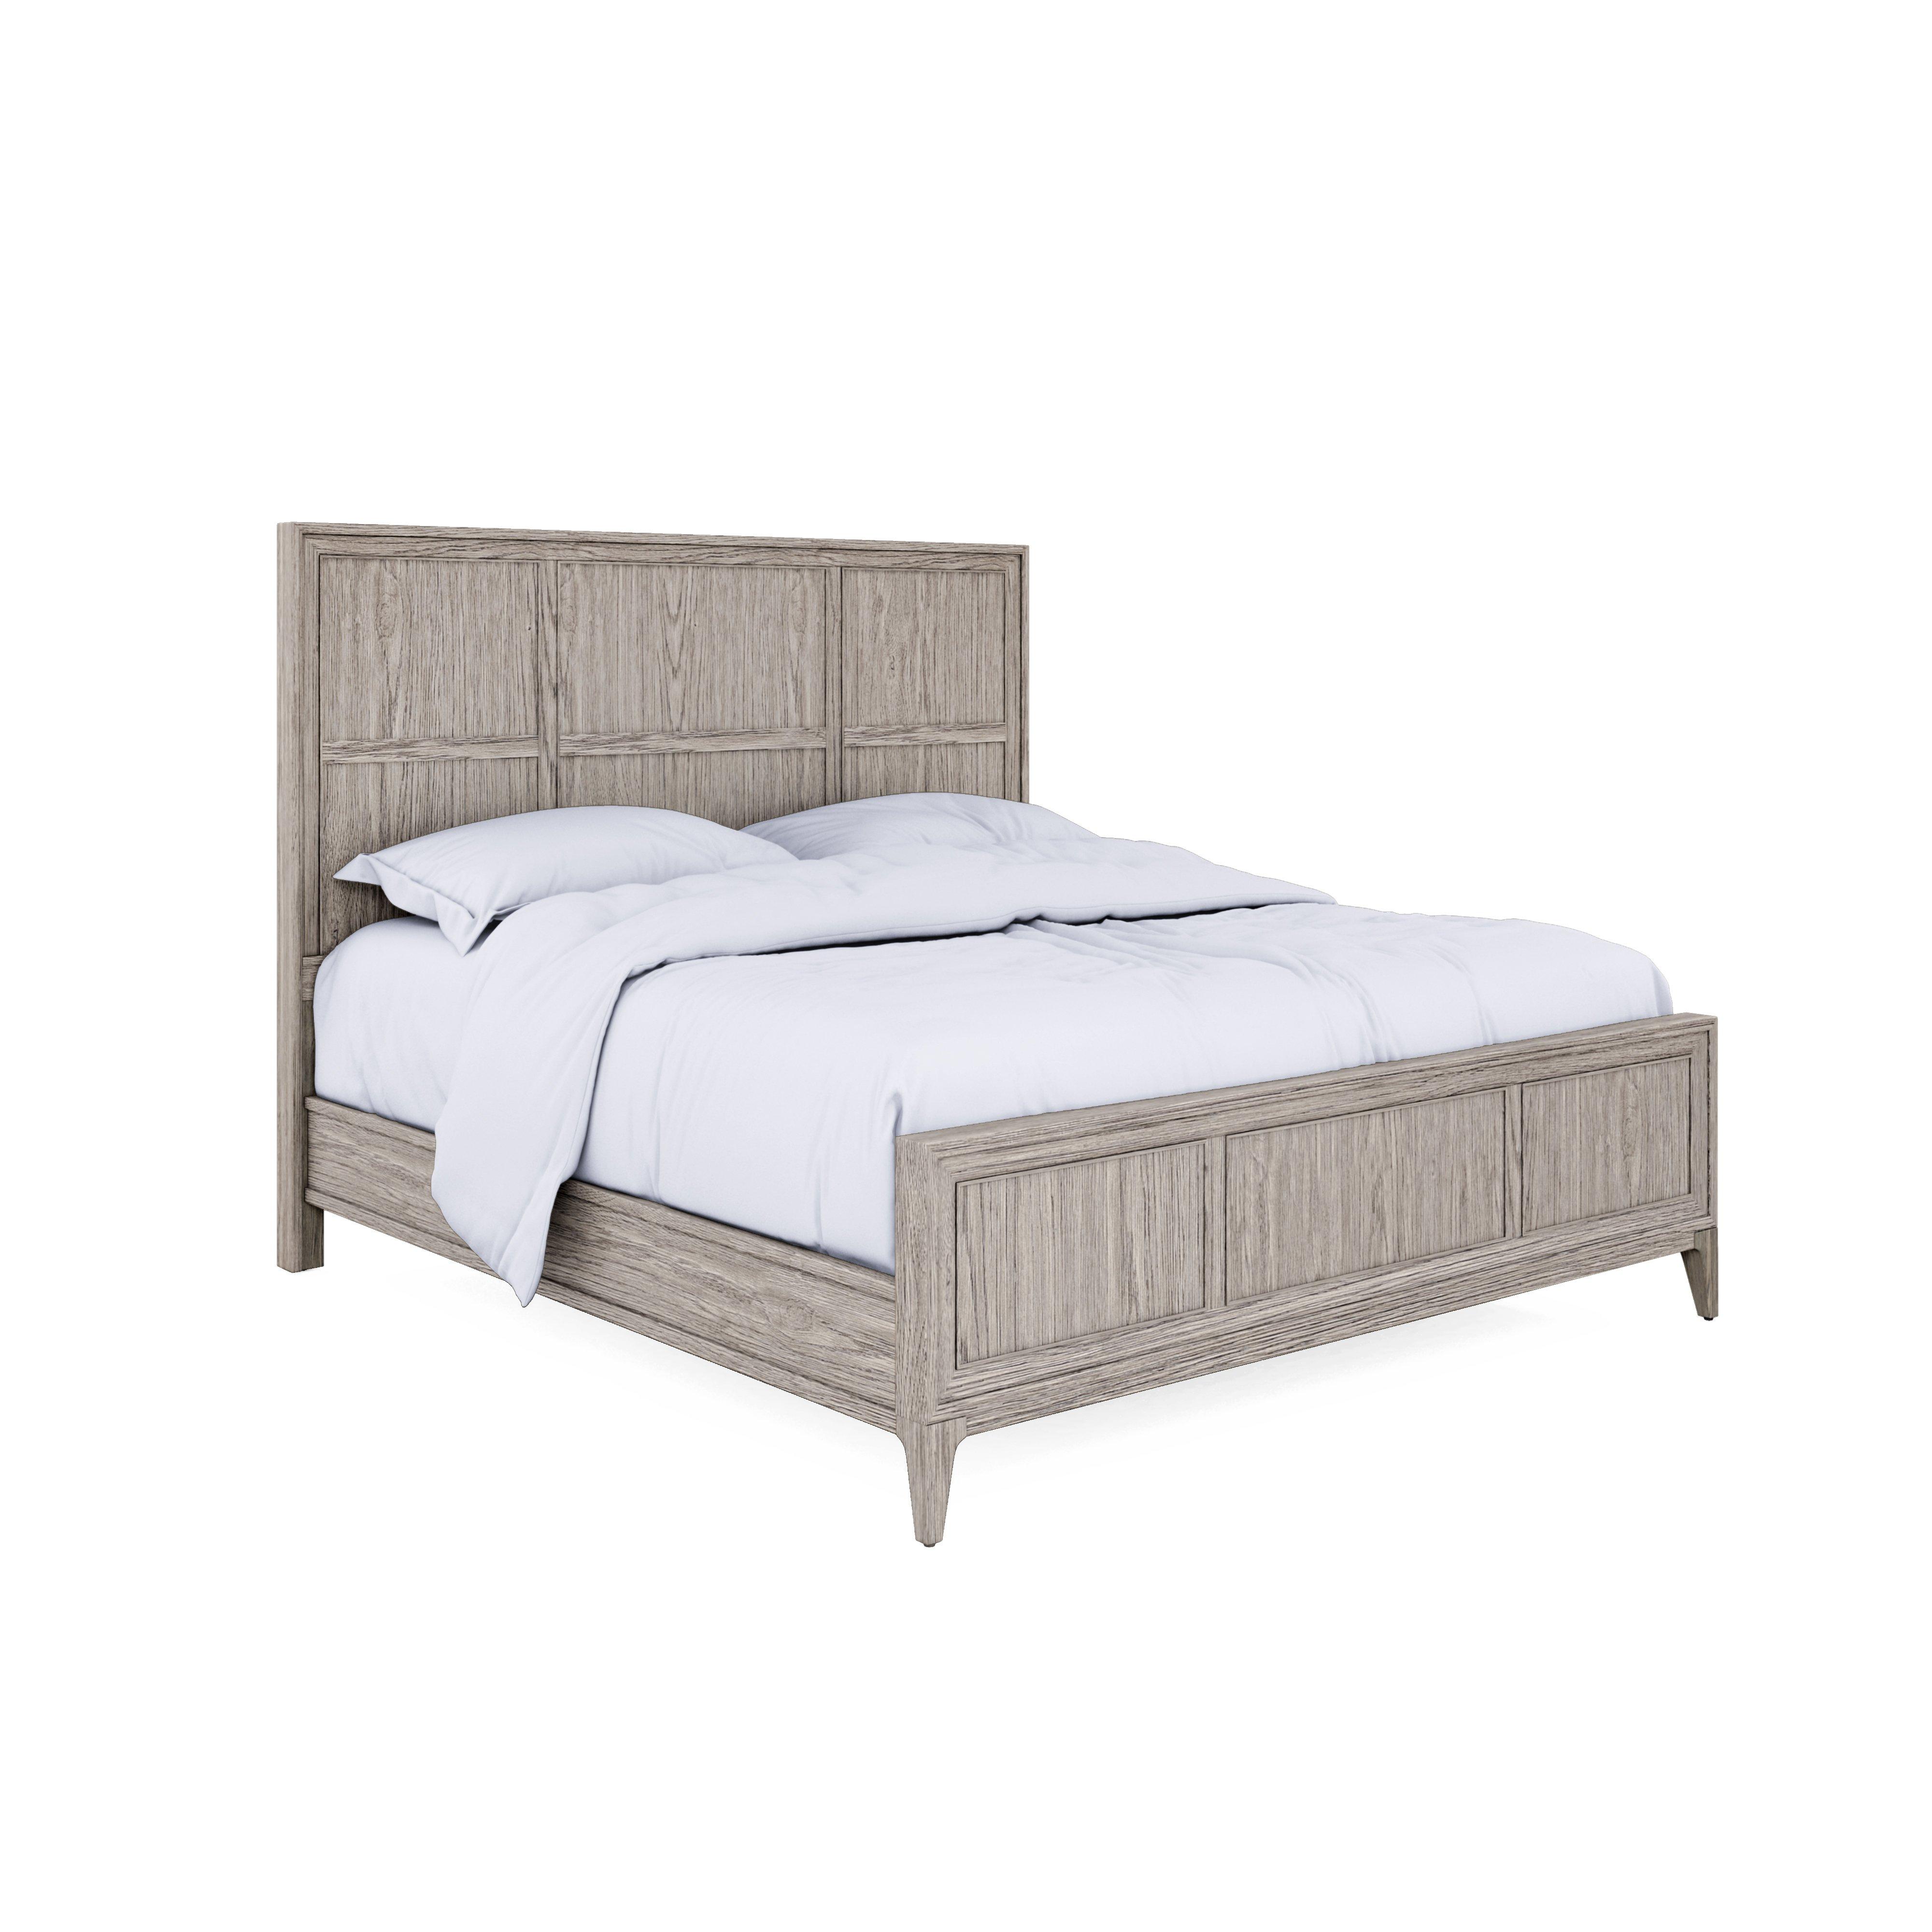 Traditional, Farmhouse Panel Bed Sojourn 316125-2311 in Beige 